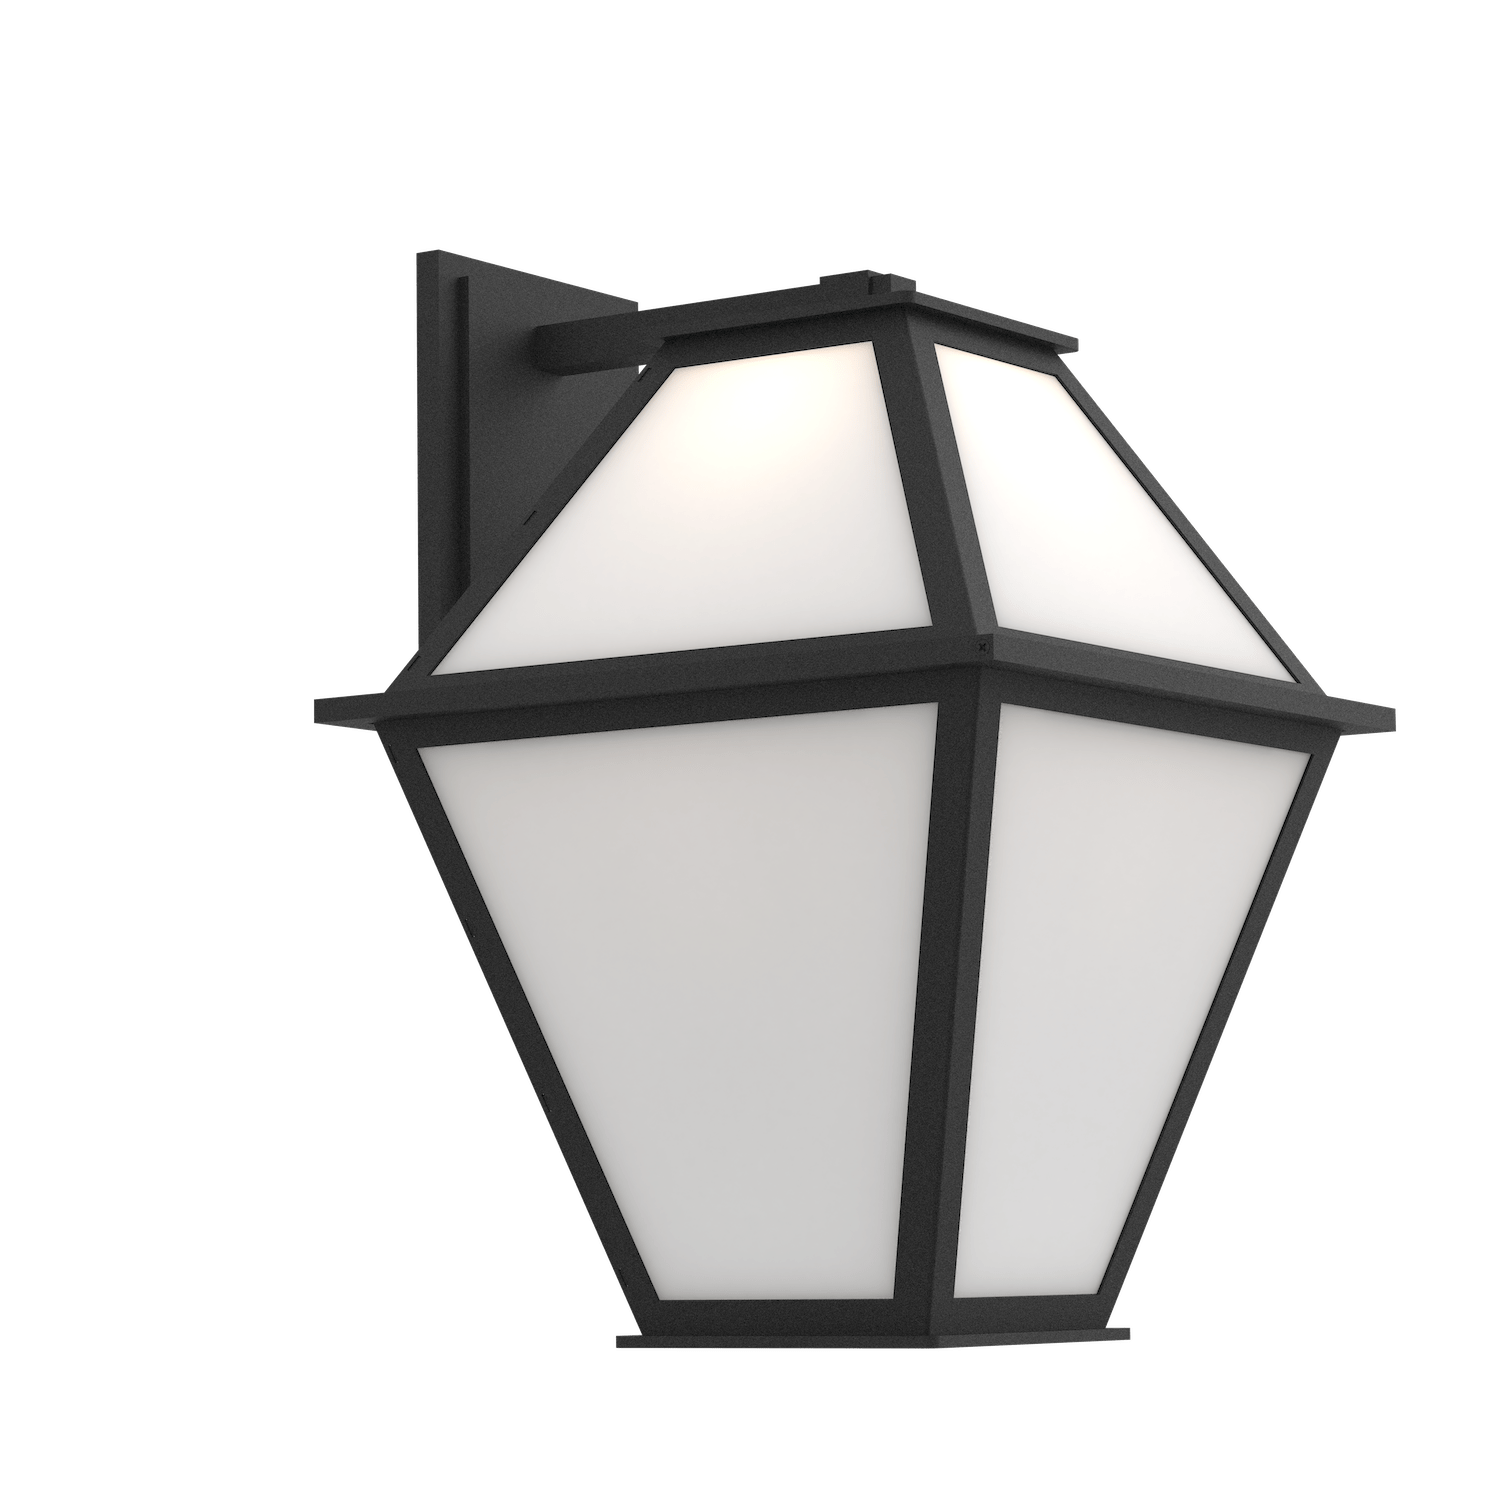 ODB0072-02-TB-FS-Hammerton-Studio-Terrace-24-inch-outdoor-frosted-lantern-with-textured-black-finish-and-frosted-glass-shade-and-LED-lamping